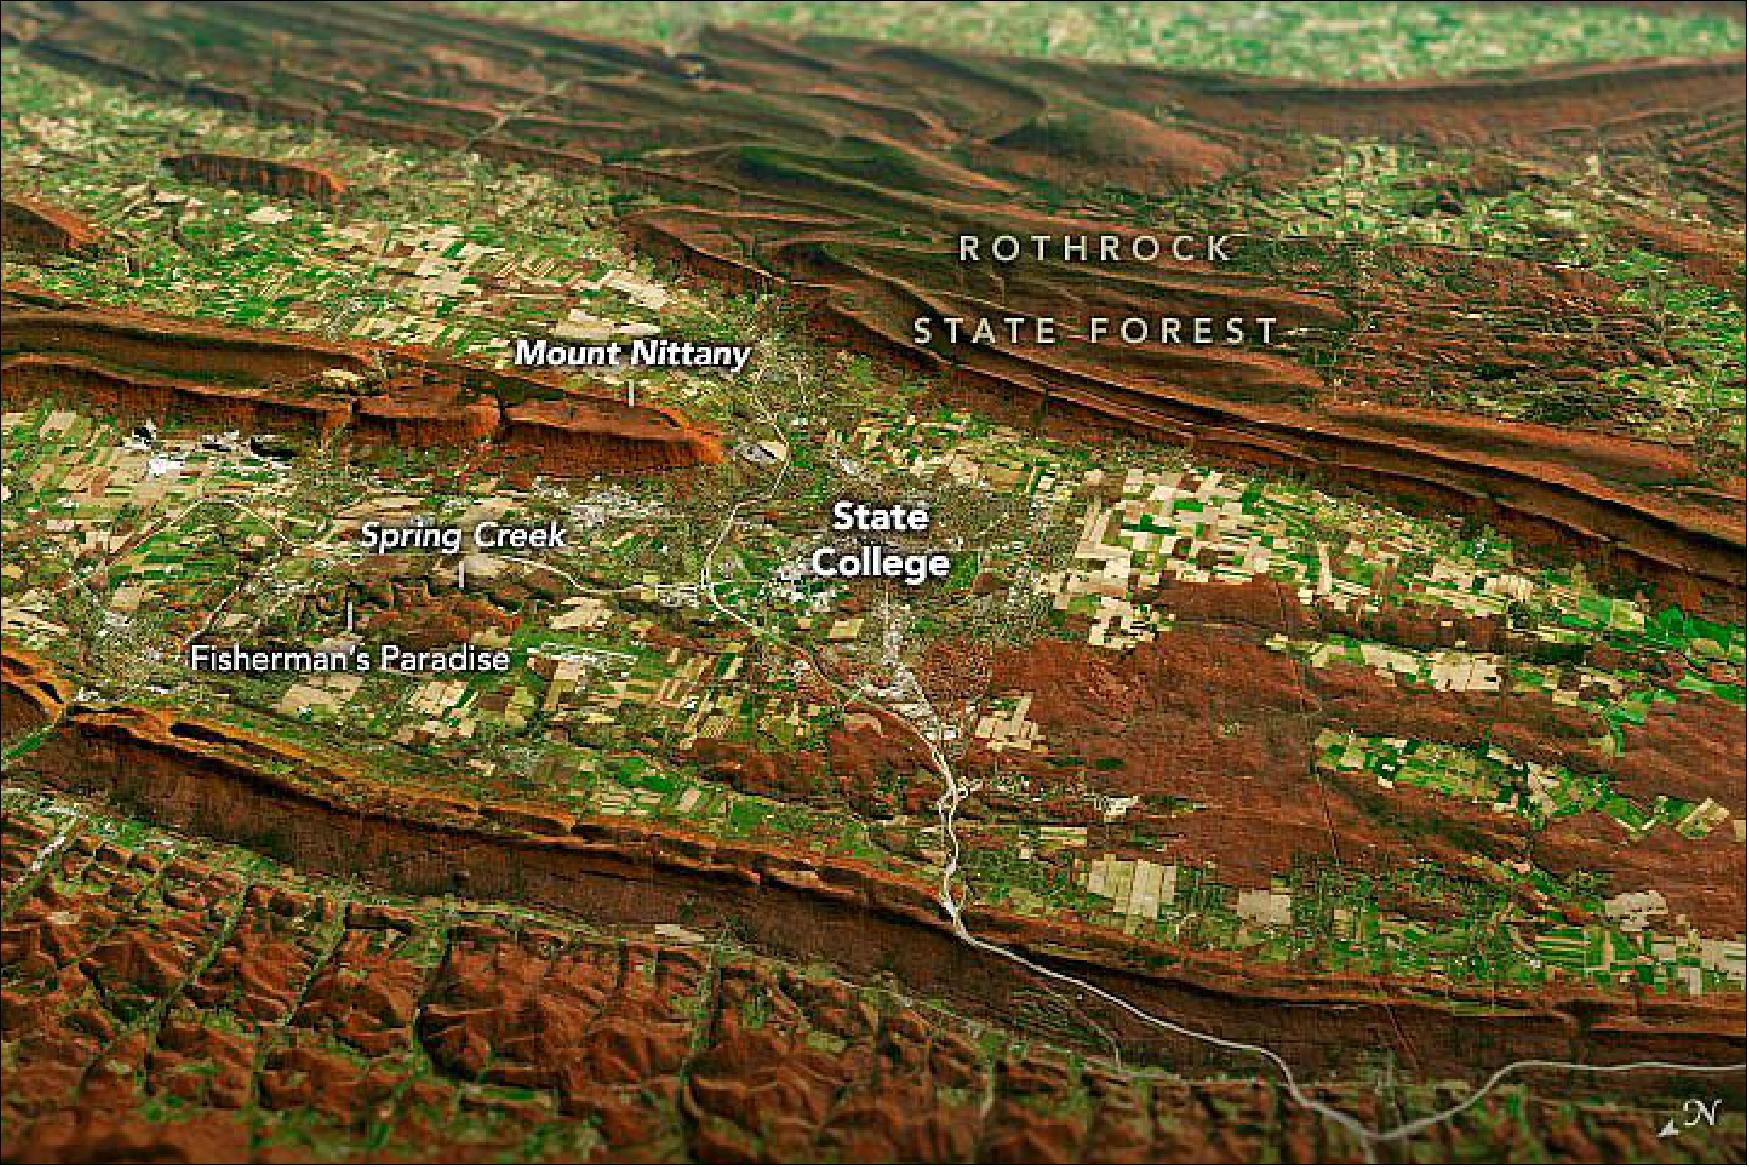 Figure 14: This image shows the same scene overlaid on a digital elevation model to highlight the topography of the area (image credit: NASA Earth Observatory)